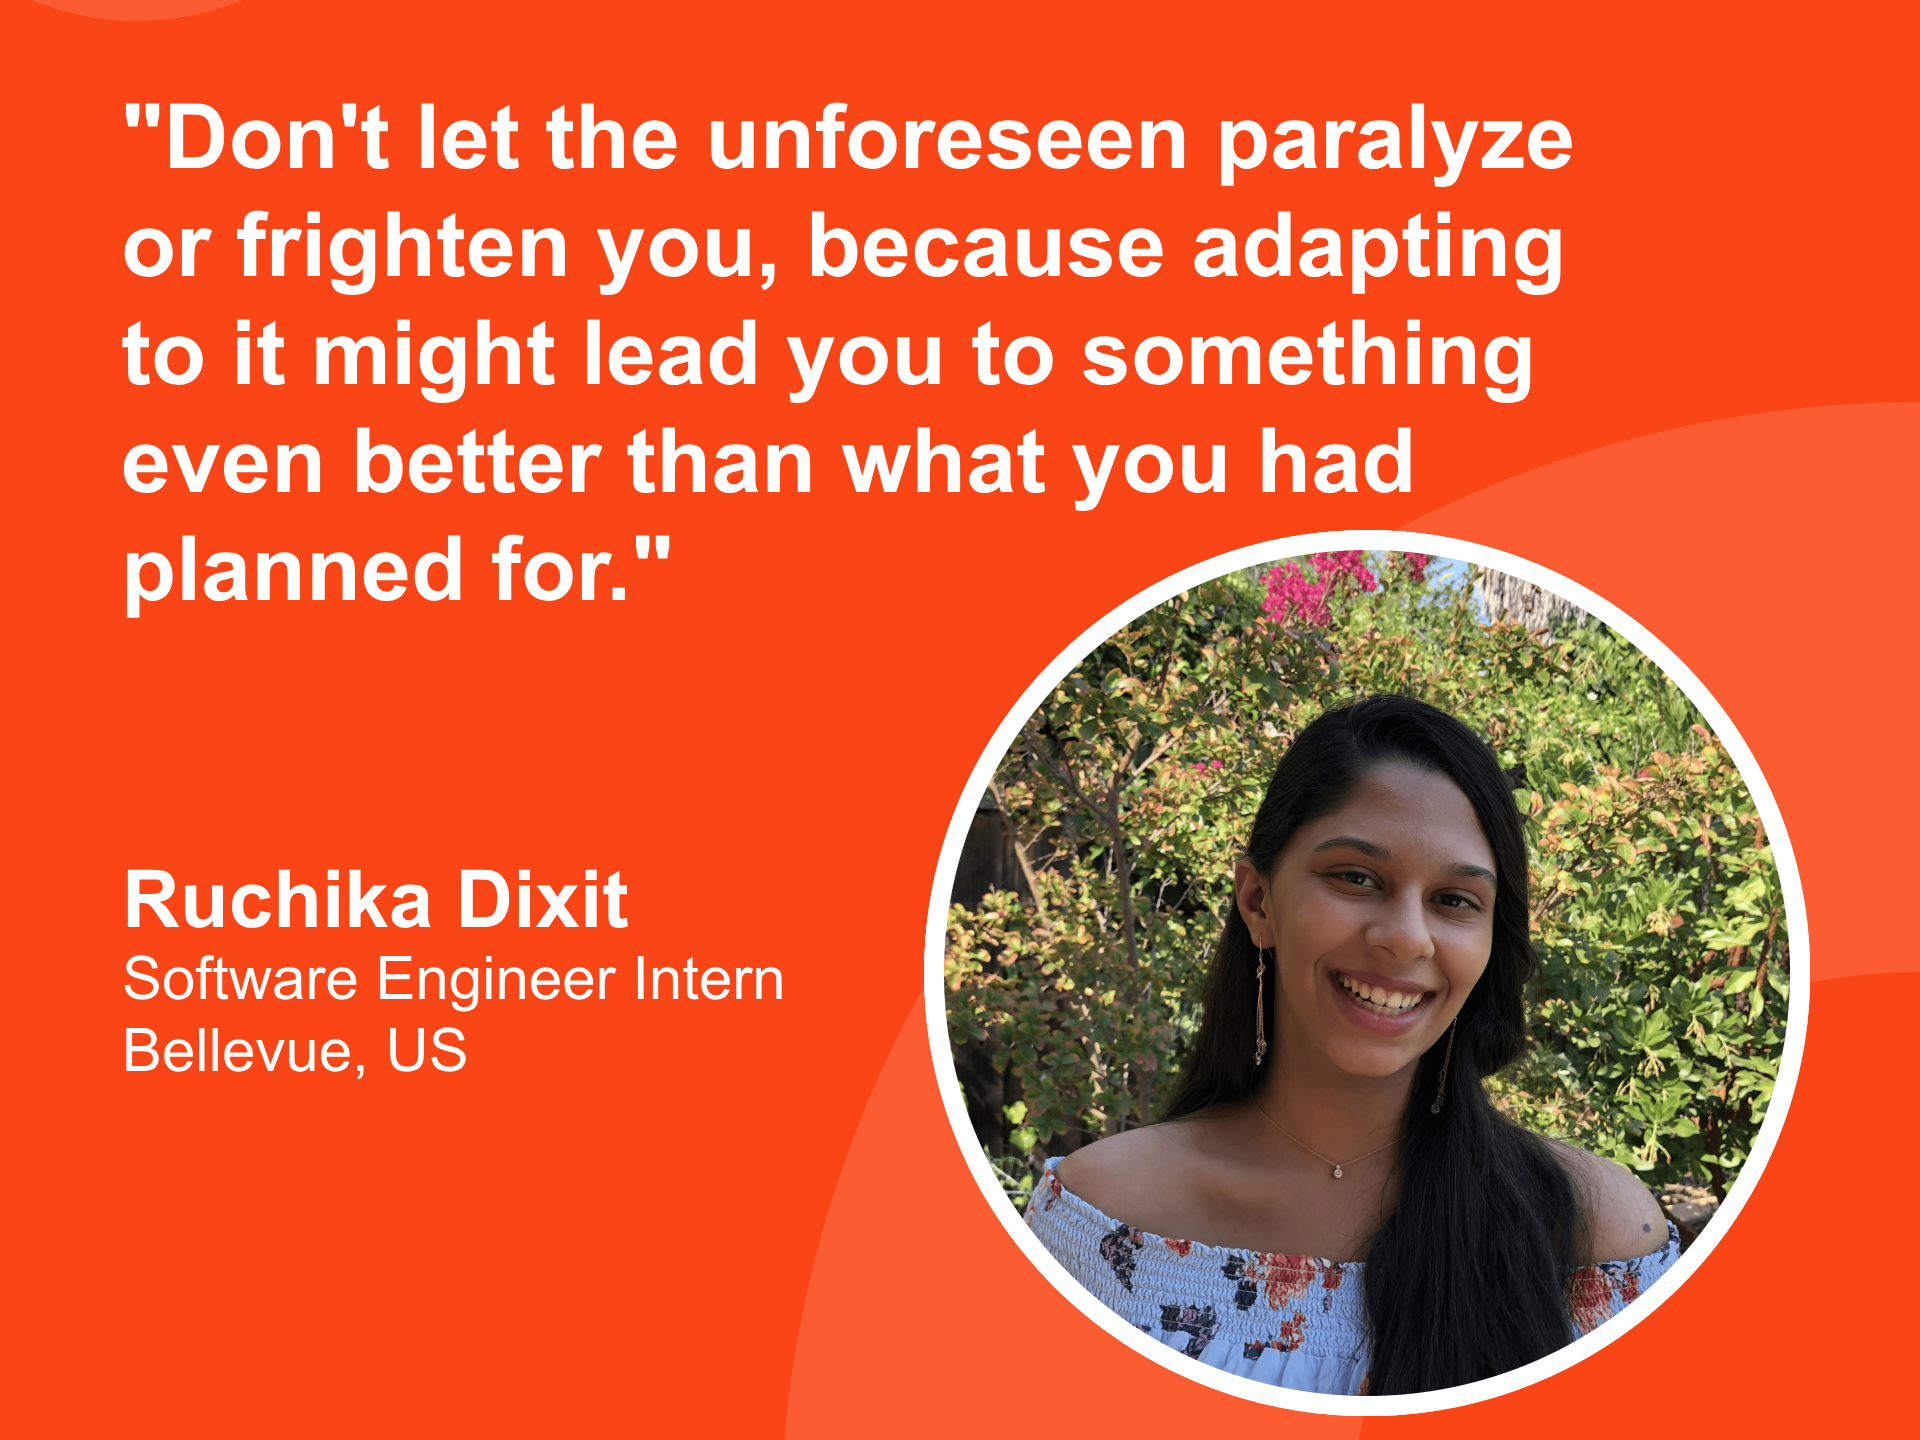 A picture containing Ruchika Dixit's headshot and one of her quotes